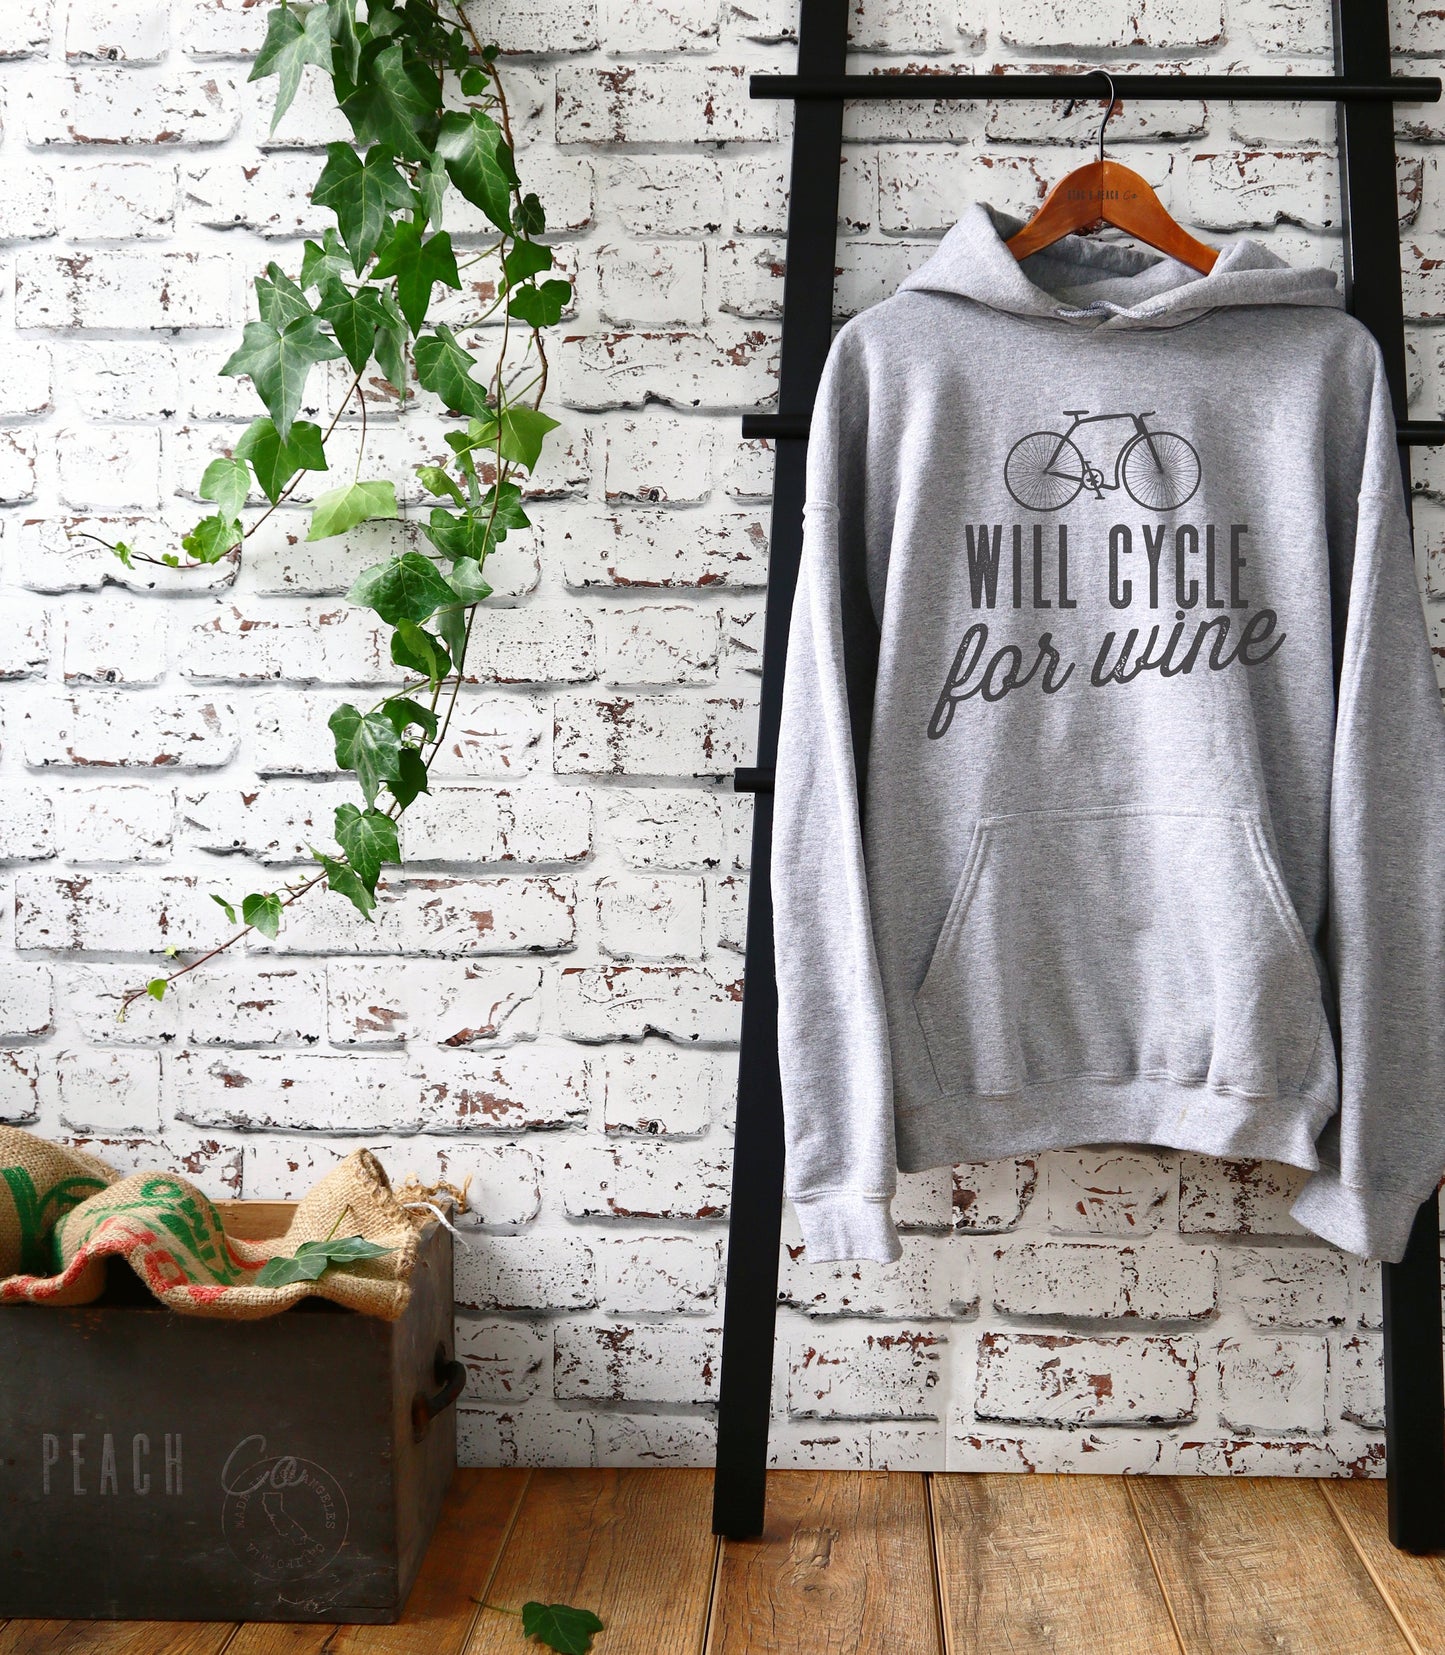 Will Cycle For Wine Hoodie - Cycling Hoodie, Cyclists Gift, Bicycle Shirt, Bicycle Lover Gift, Cycling Shirt, Triathlon Shirt, Cyclist Shirt